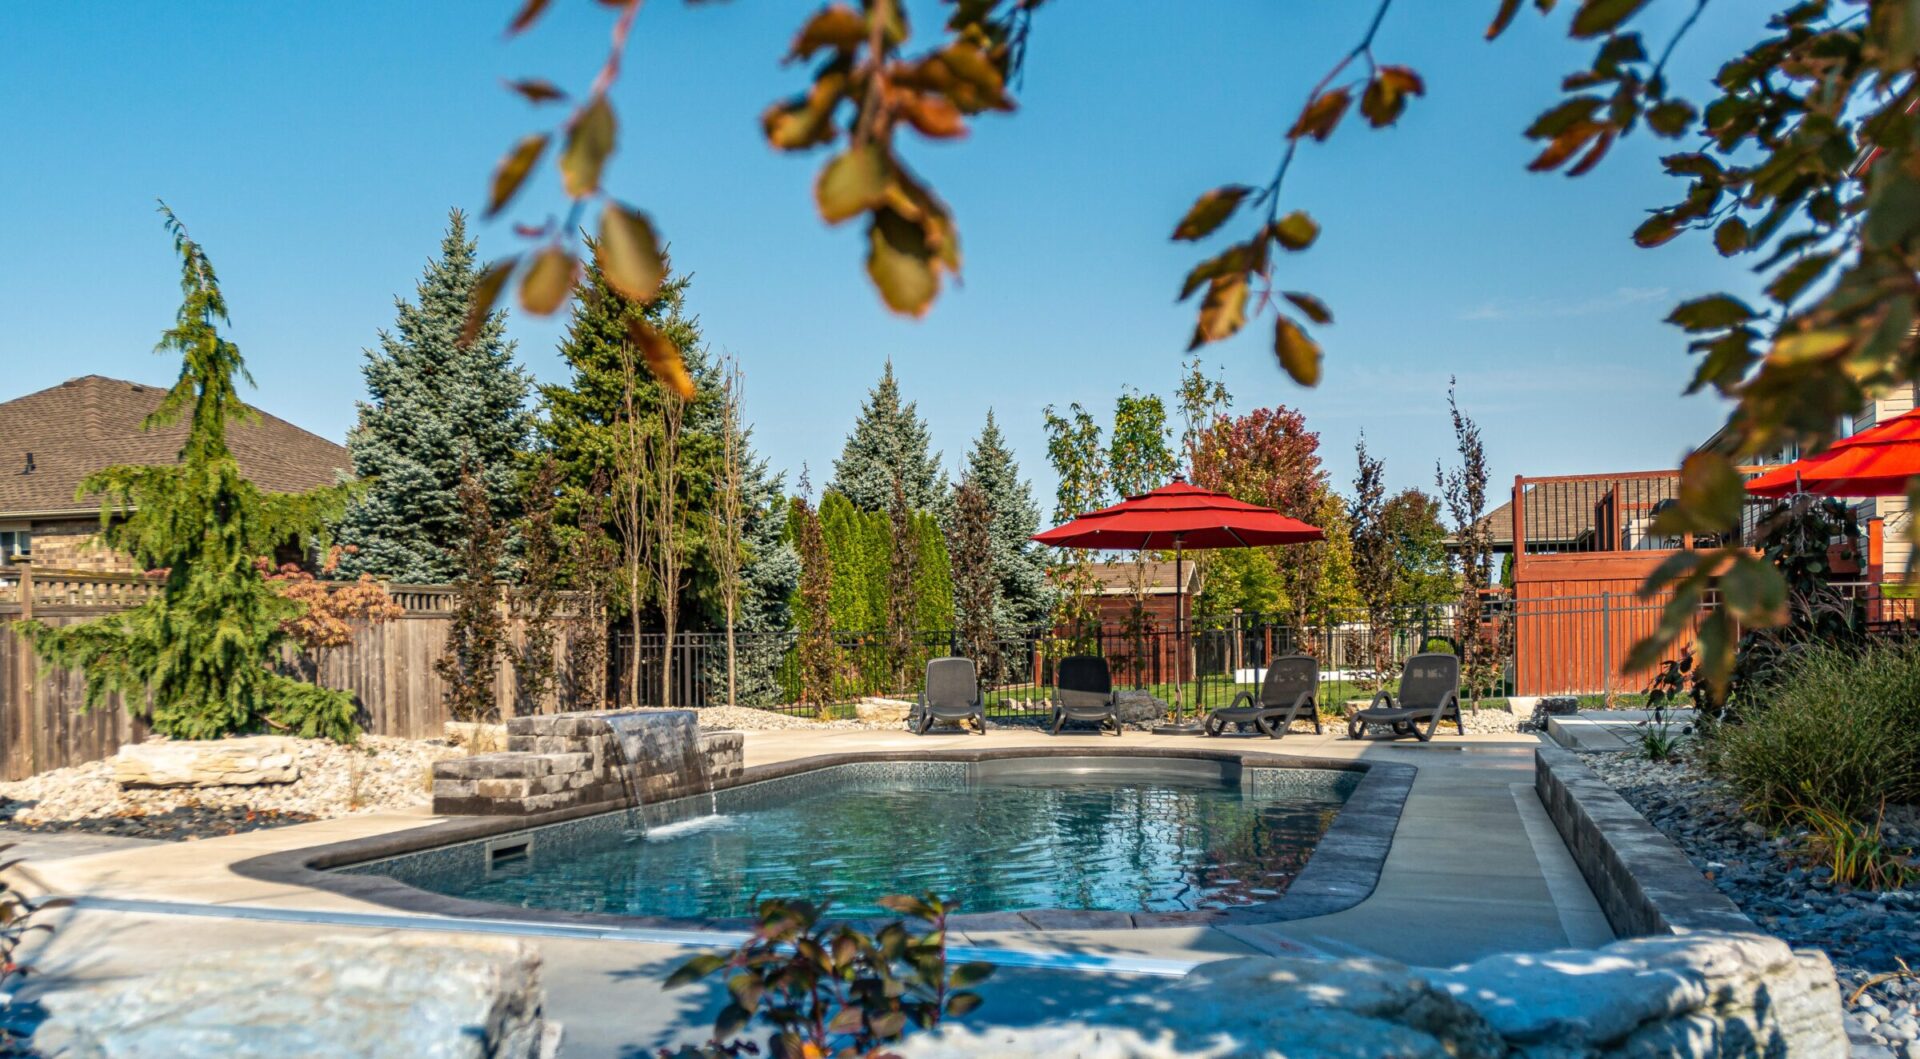 This image depicts an inviting backyard with an in-ground pool, stone borders, lounge chairs, and red umbrellas, surrounded by fences and greenery.